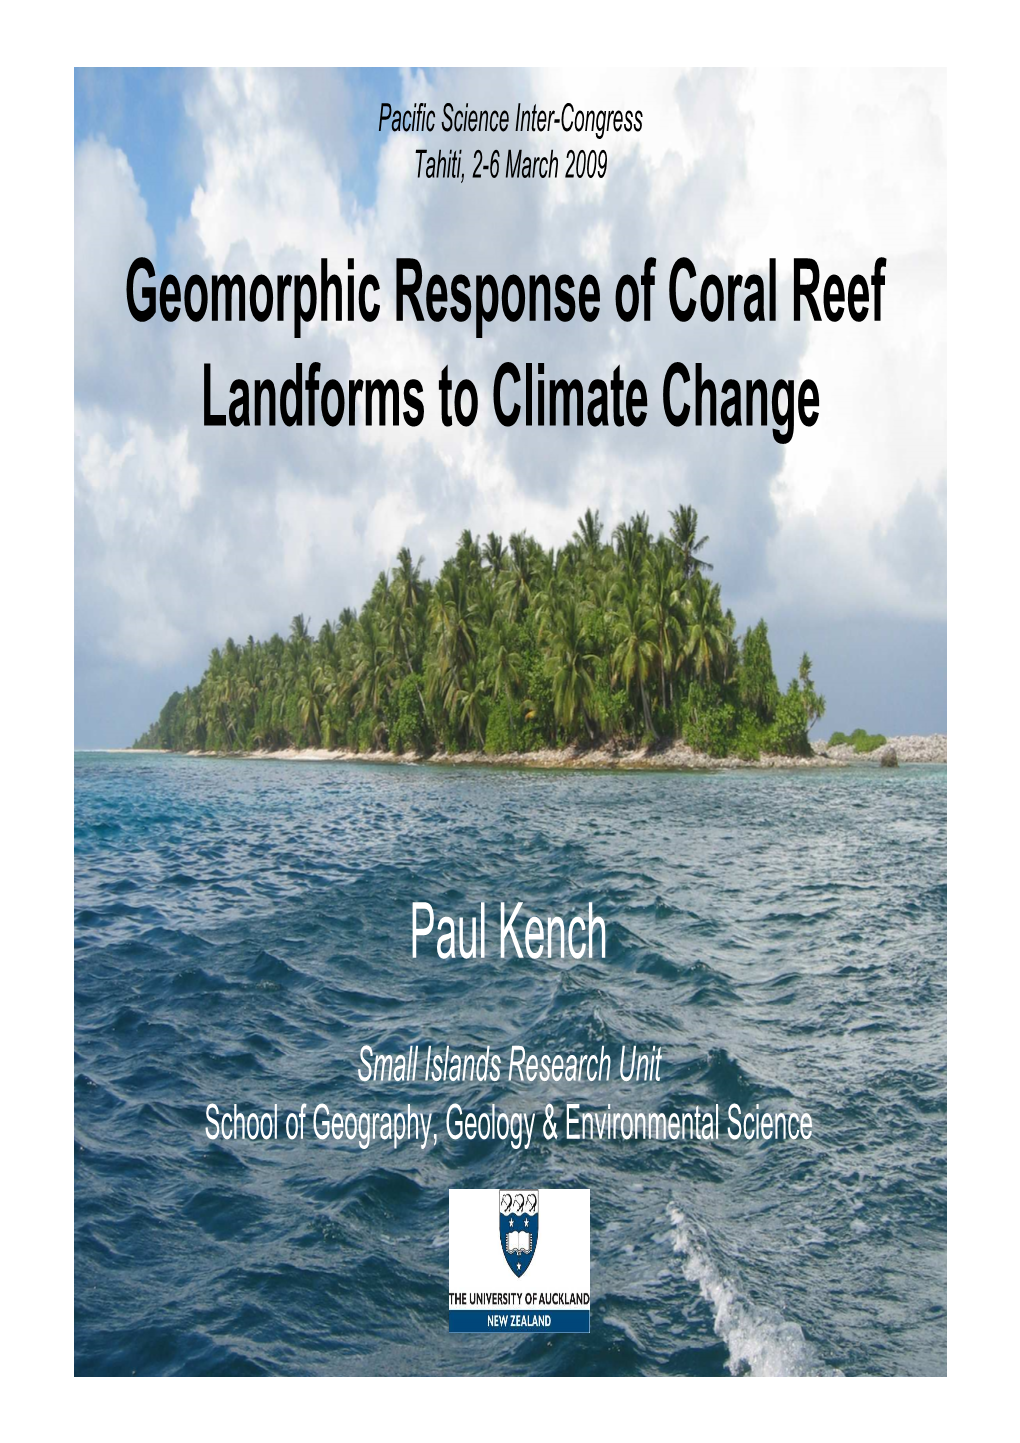 Geomorphic Response of Coral Reef Landforms to Climate Change